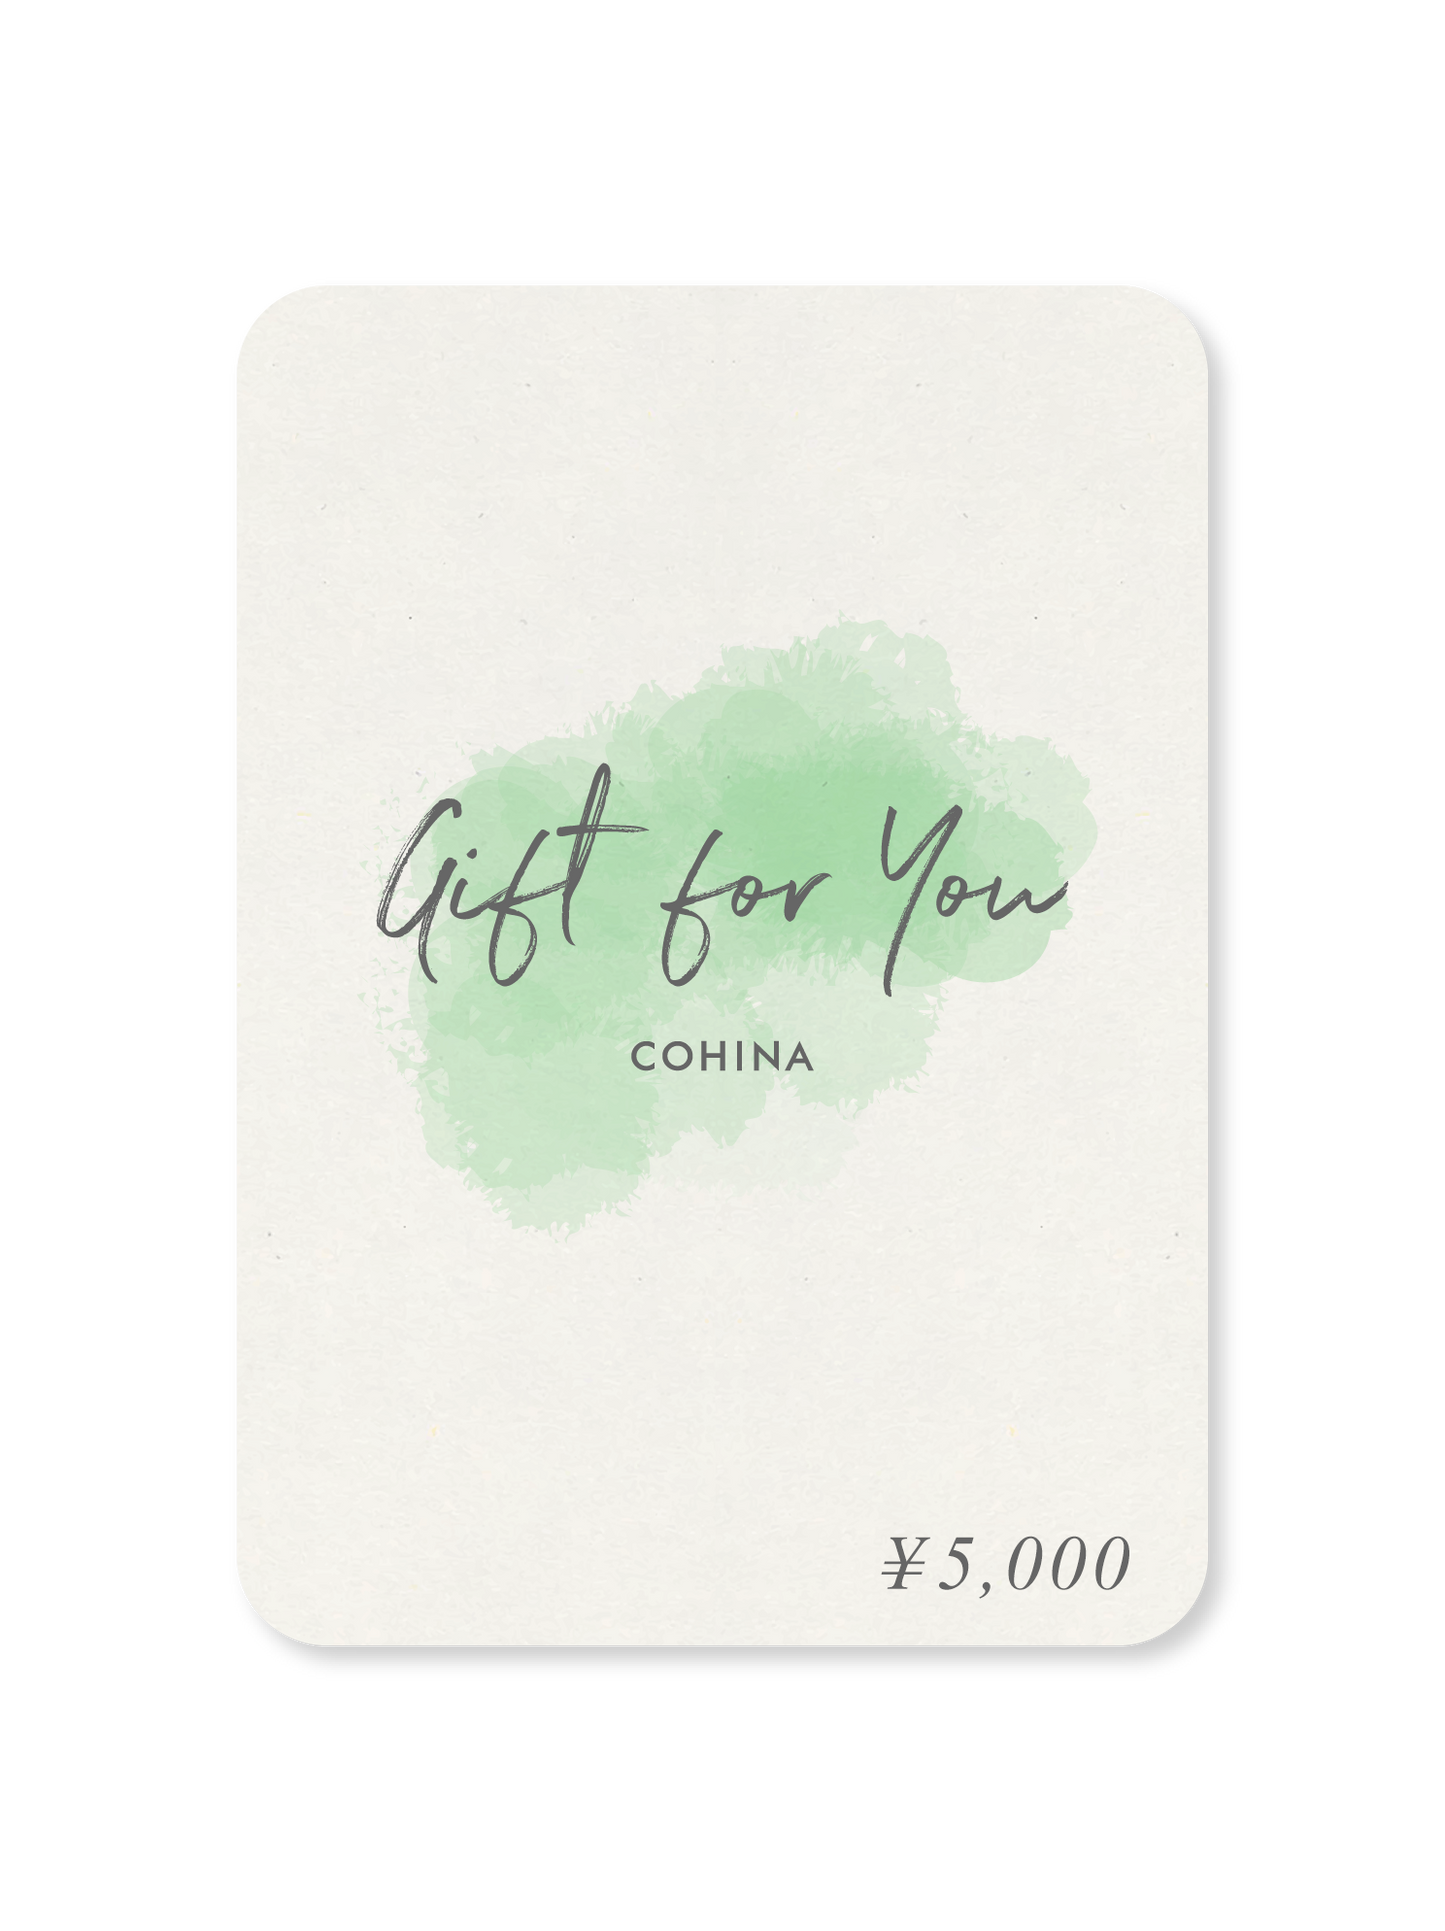 COHINA GIFT CARD 【 Gift for you 】